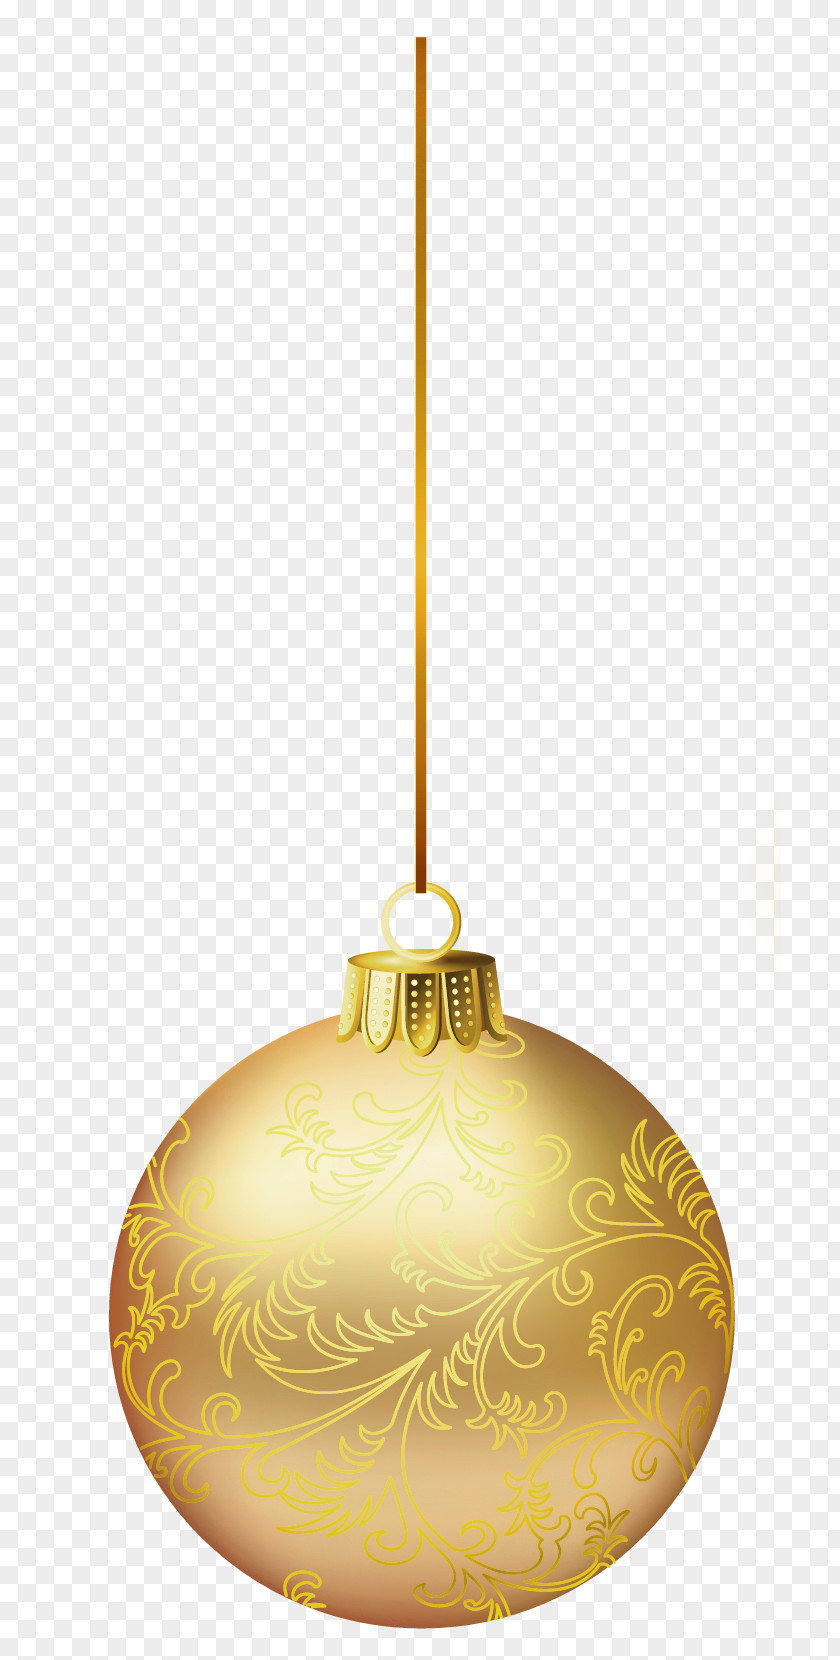 Gold Christmas Ball Picture Lighting Ornament Design PNG